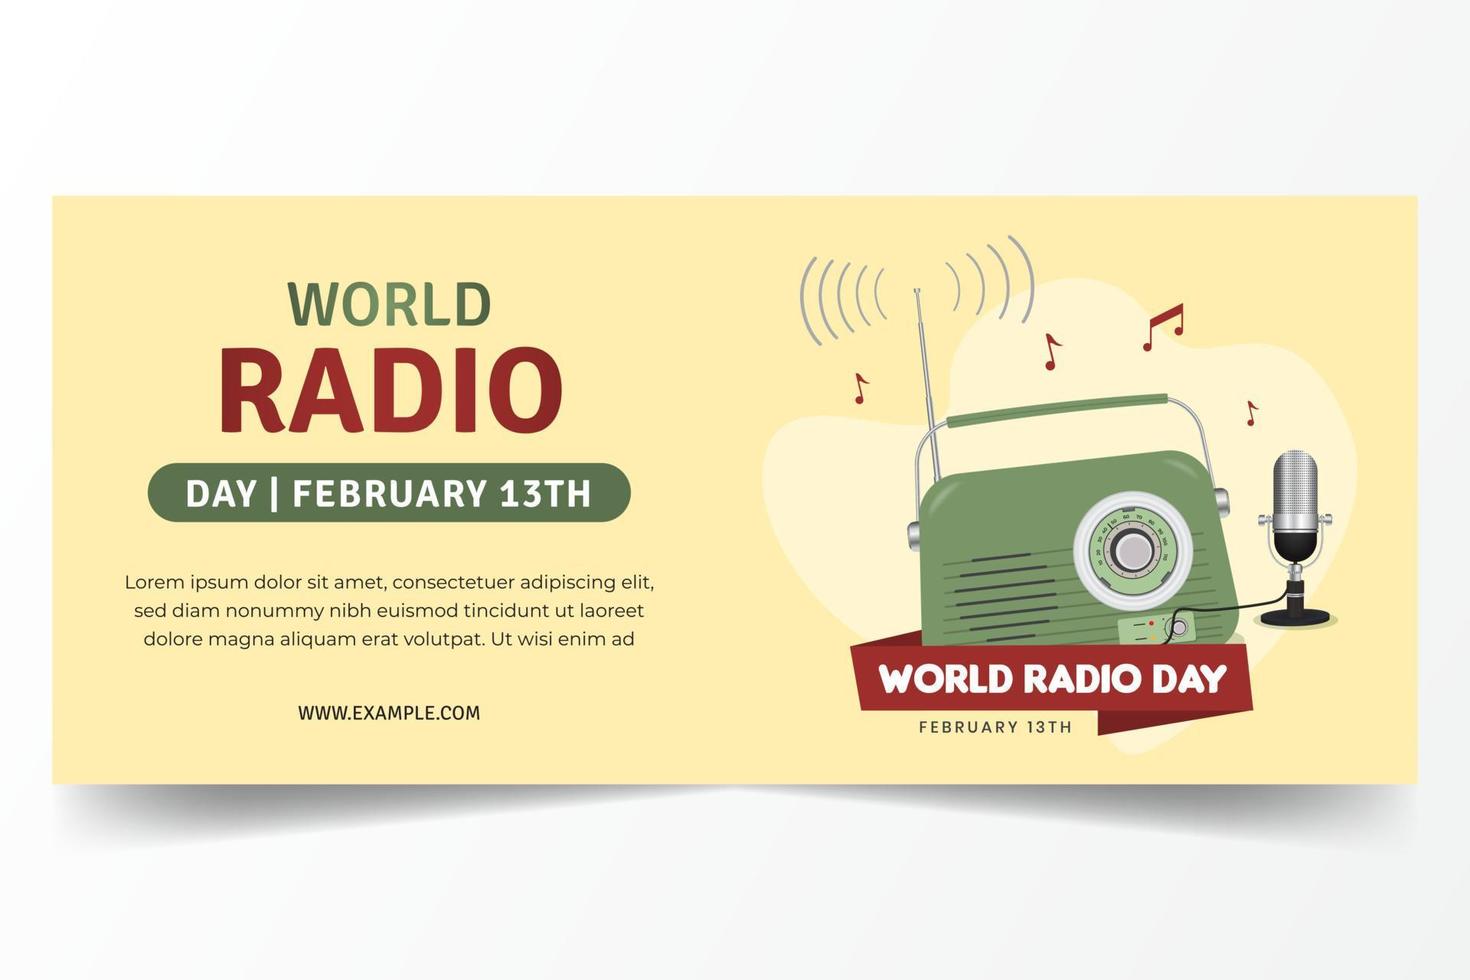 Happy World Radio Day February 13th horizontal banner design with vintage radio and microphone illustration vector